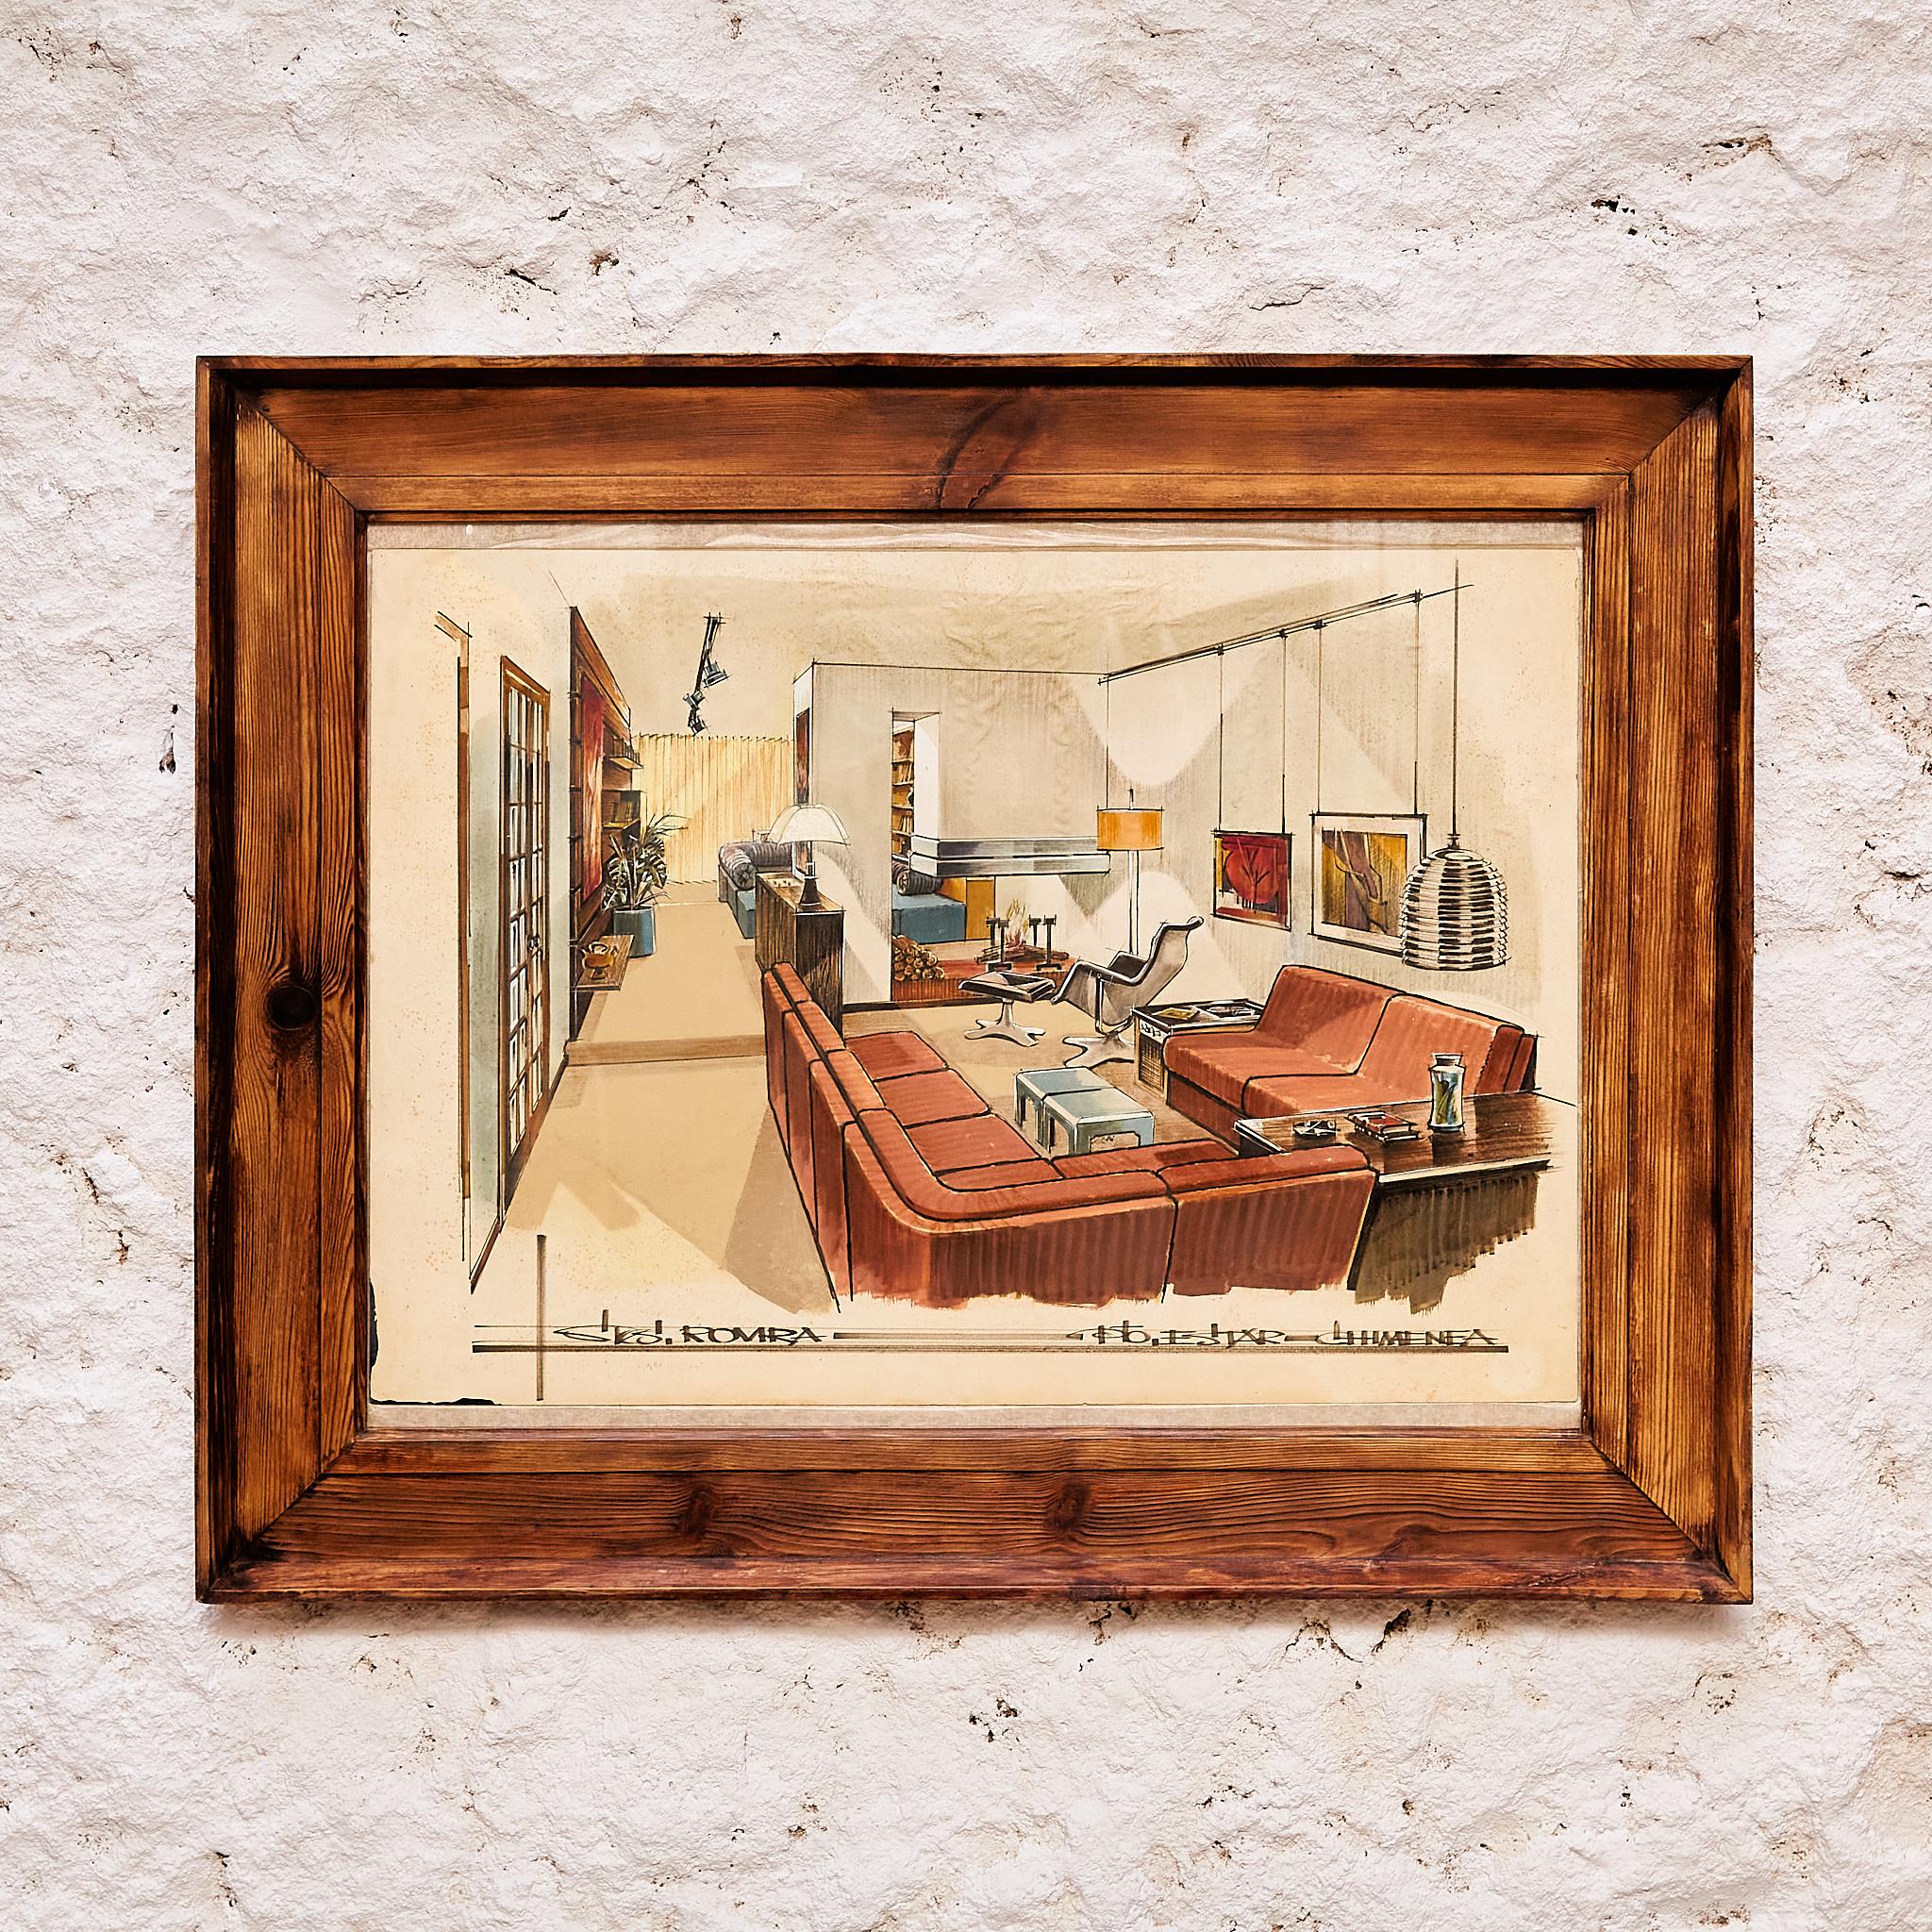 Step into a world of nostalgia with this original drawing for a Barcelona interior project, attributed to Sr. Romra, circa 1970. Encased in a wood frame, this piece embodies a slice of history, capturing the essence of an era's design